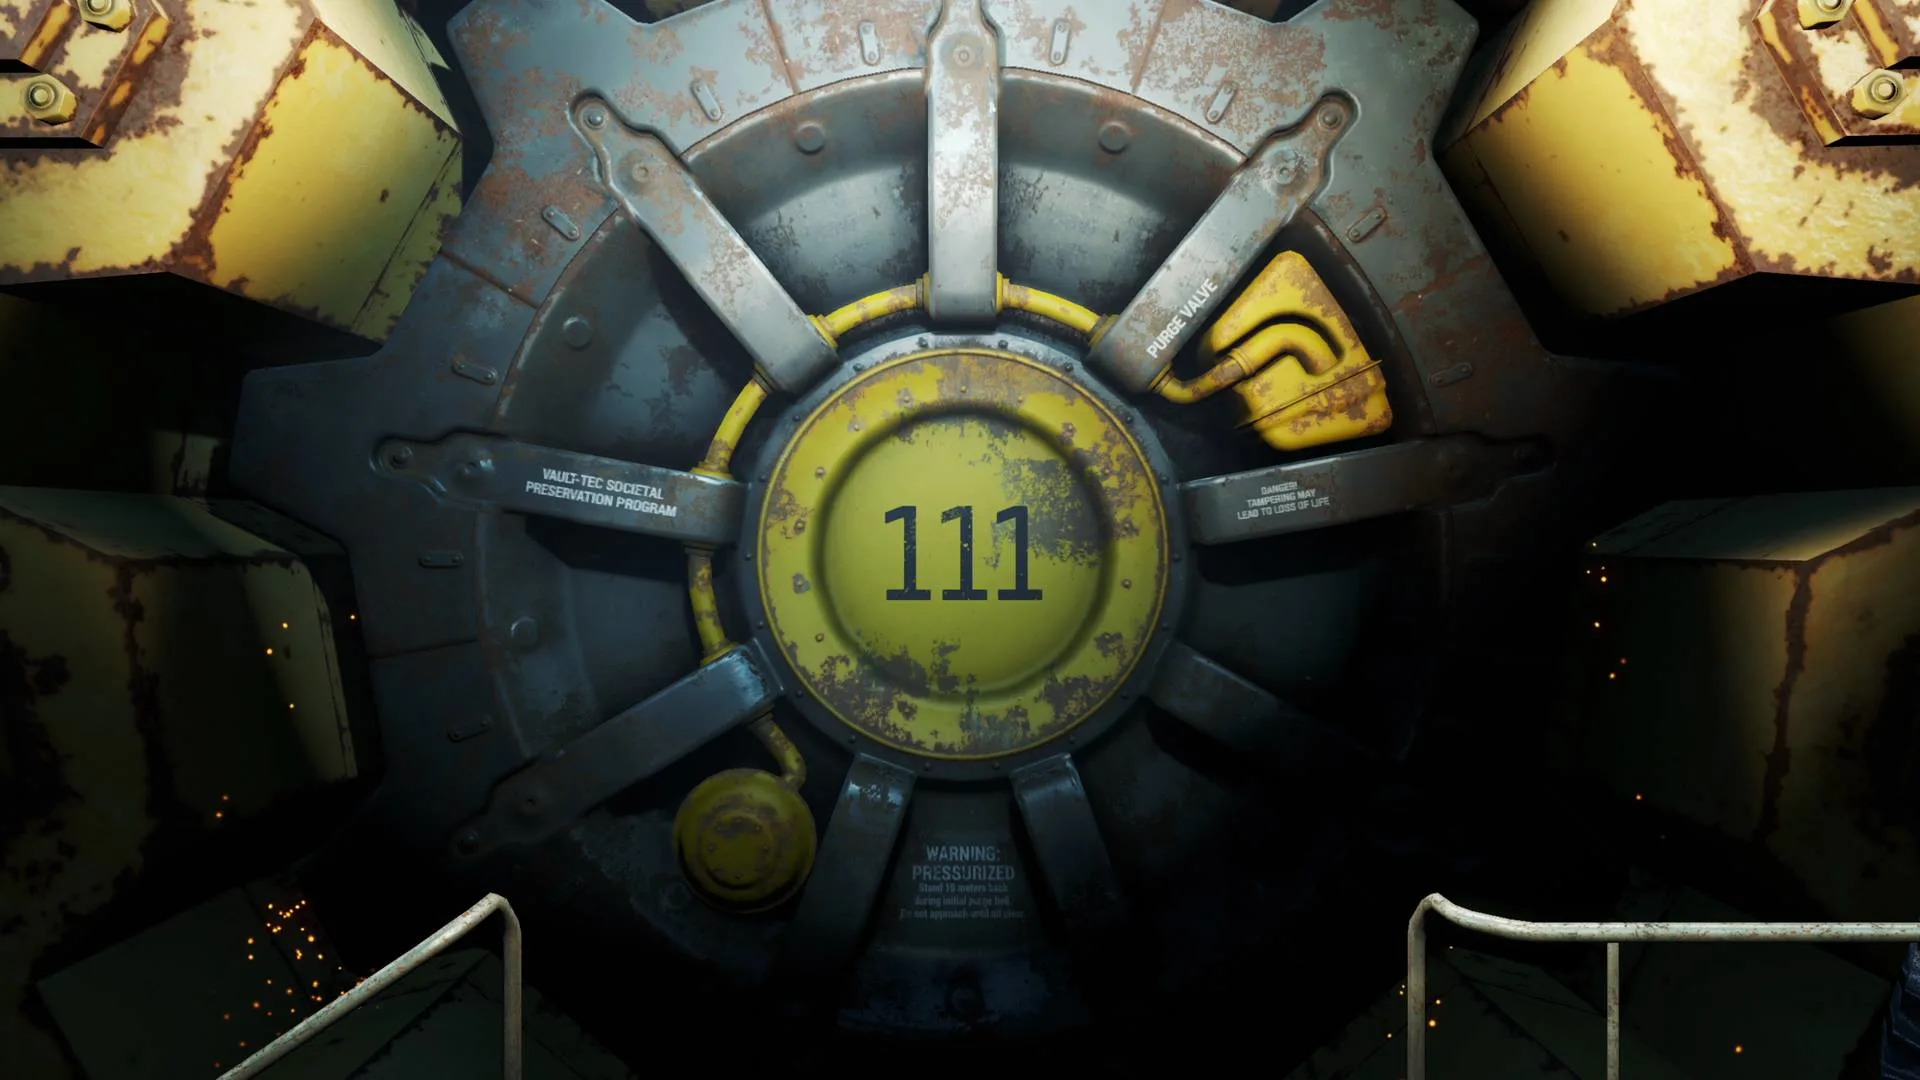 A promo screenshot for Fallout 4 featuring Vault 111